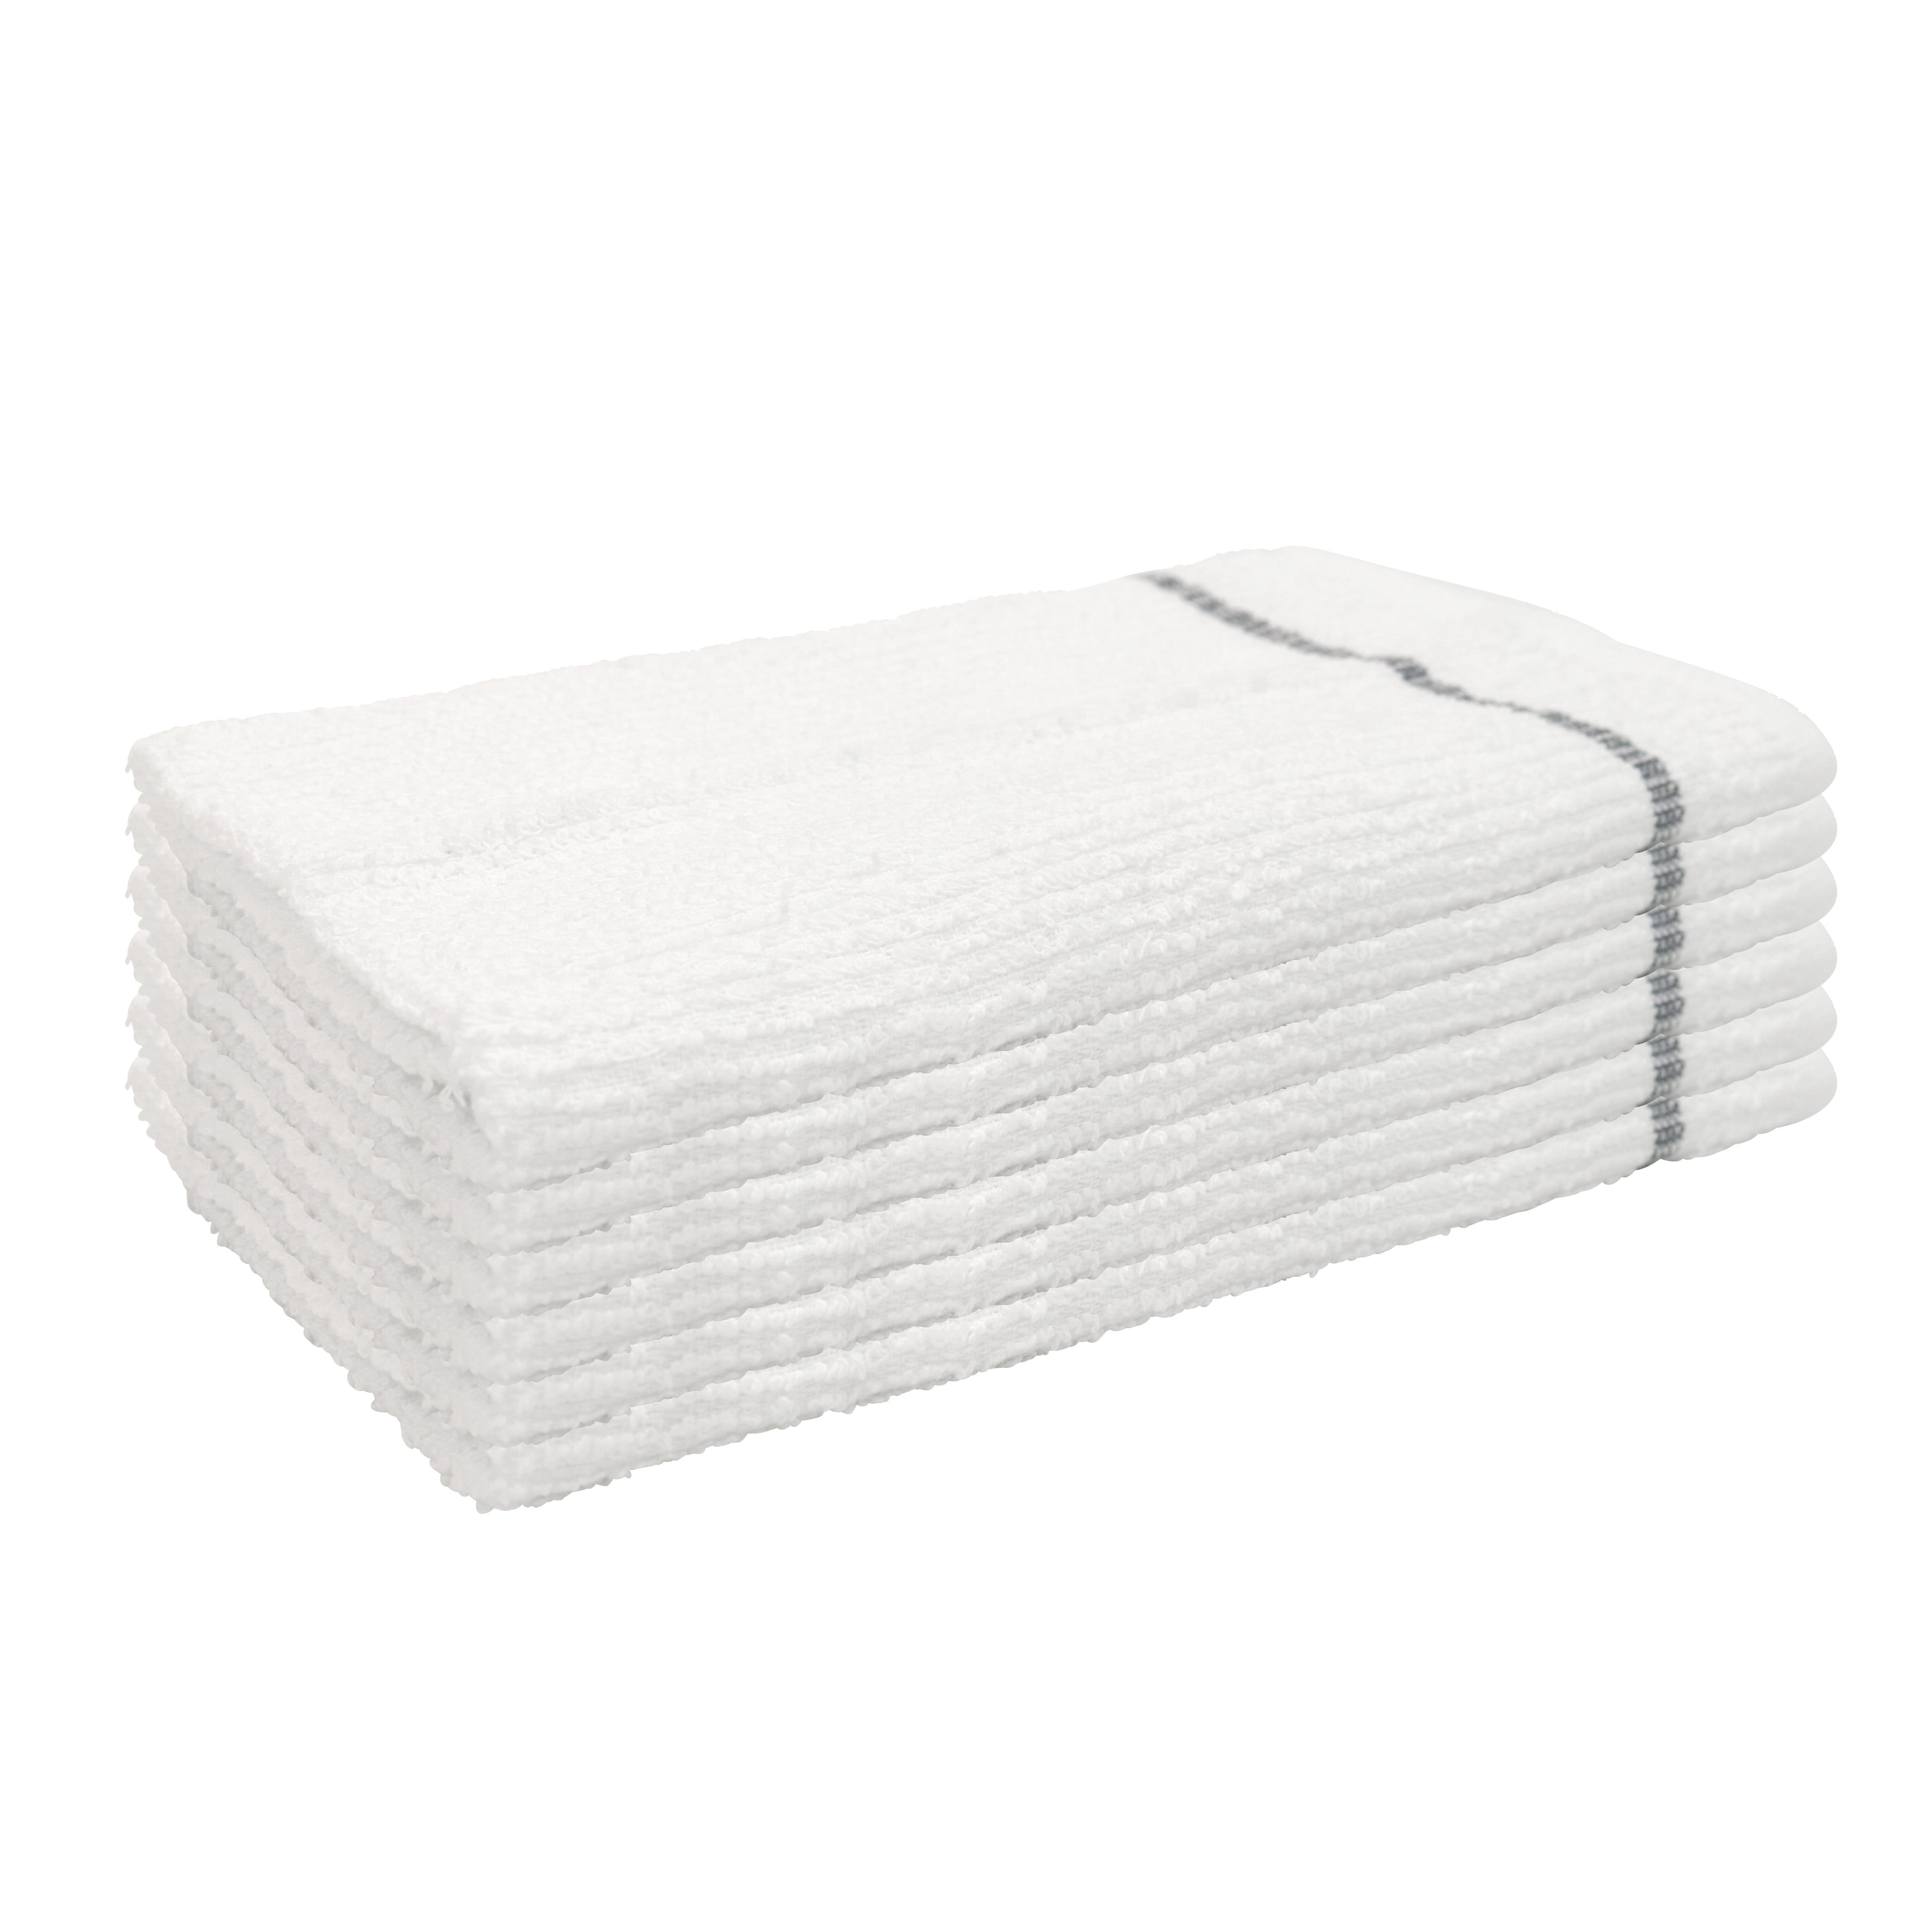 Bulk Case of 192 Bar Mop Kitchen Towels, 16x19 in., Assorted Colors &  Patterns, Single Style, 1 unit - Fry's Food Stores